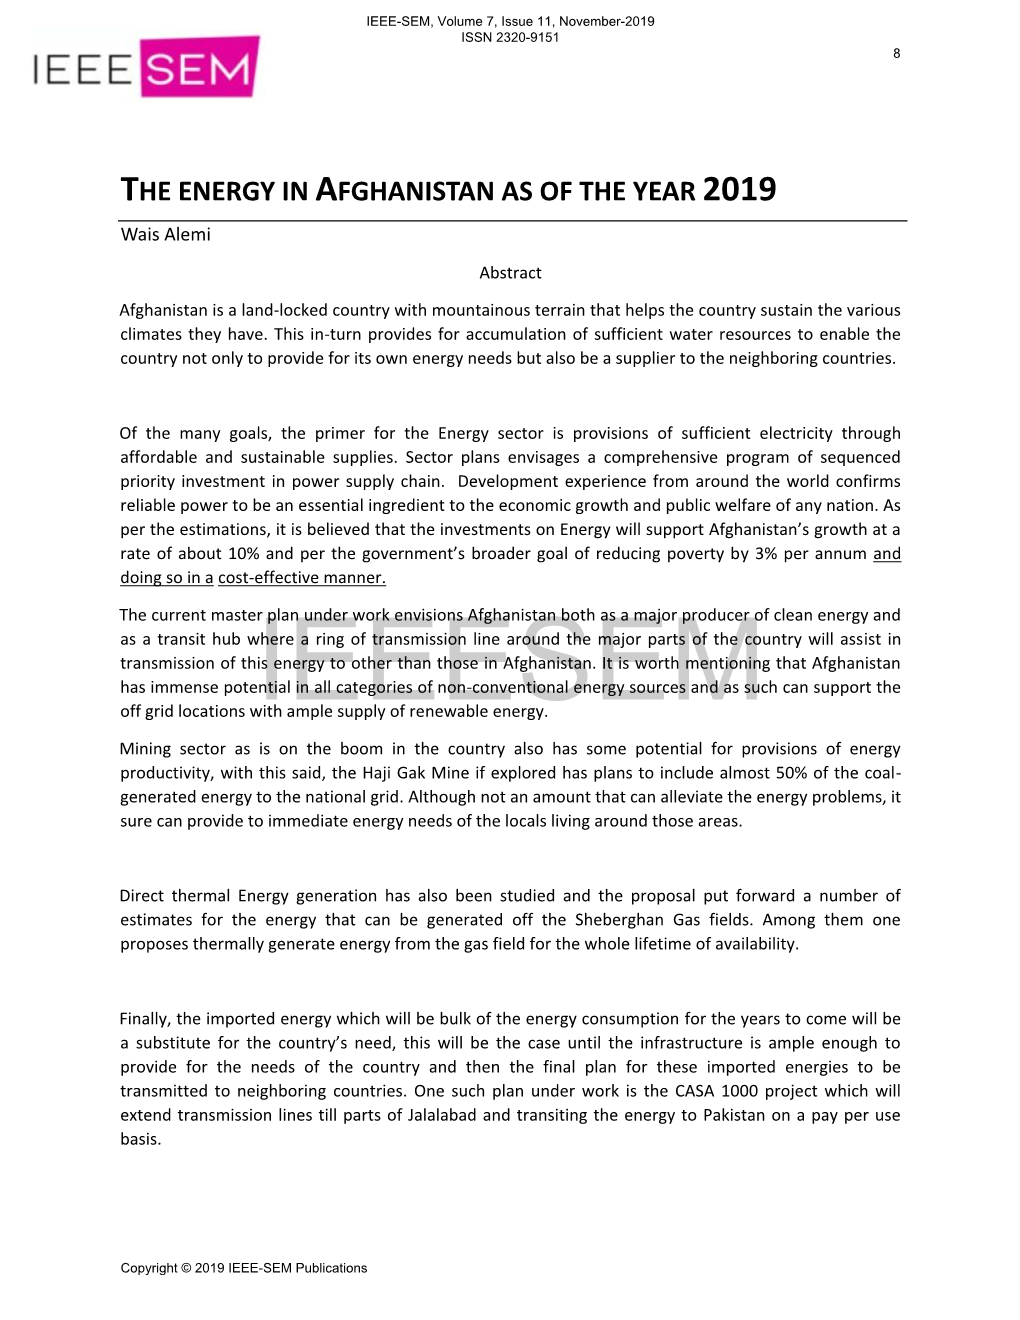 THE ENERGY in AFGHANISTAN AS of the YEAR 2019 Wais Alemi